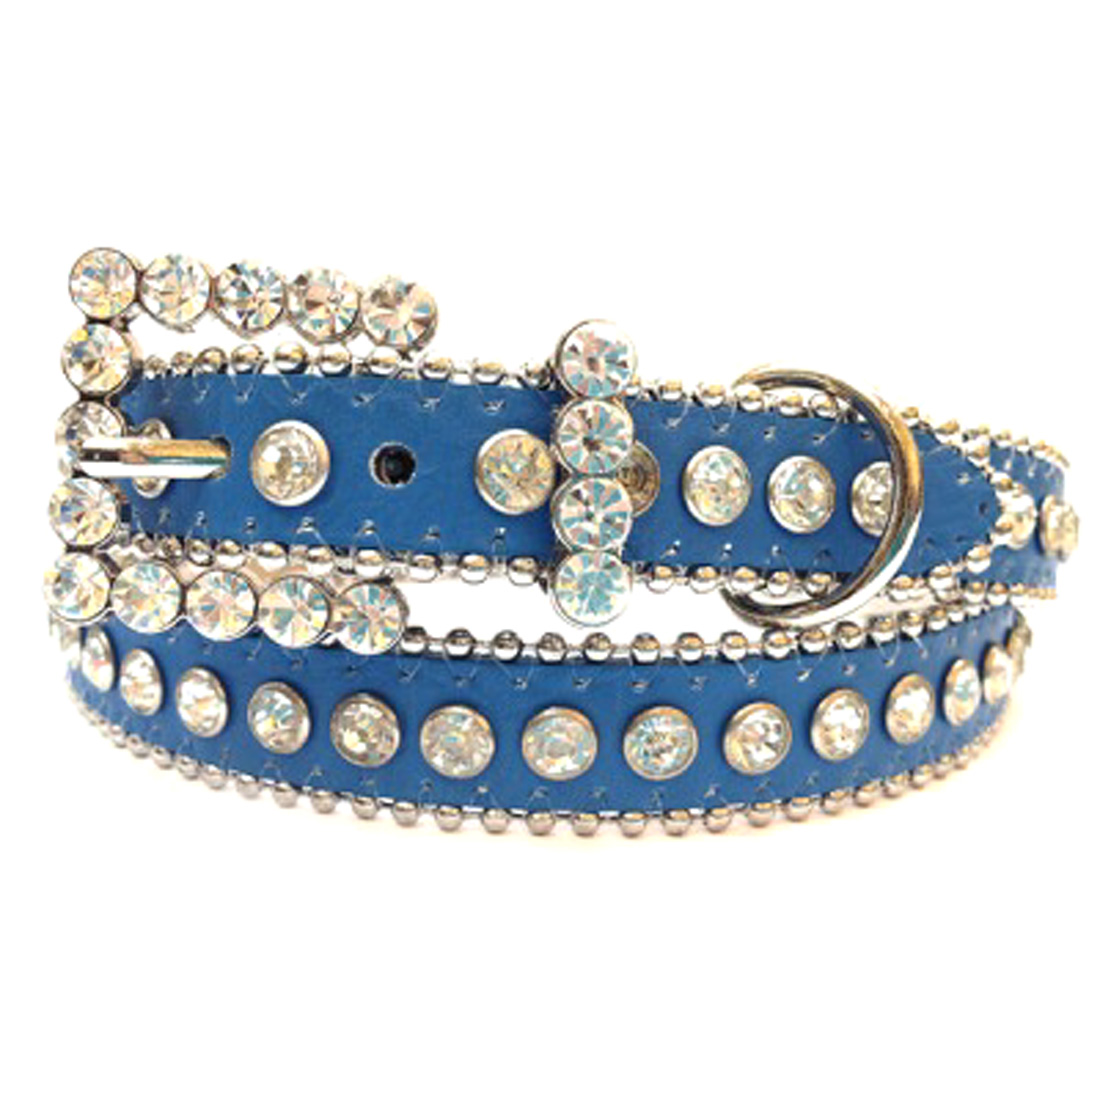 Blue Leather Belt with Clear Rhinestones and Rhinestone Belt Buckle, Size M/L - image 1 of 1